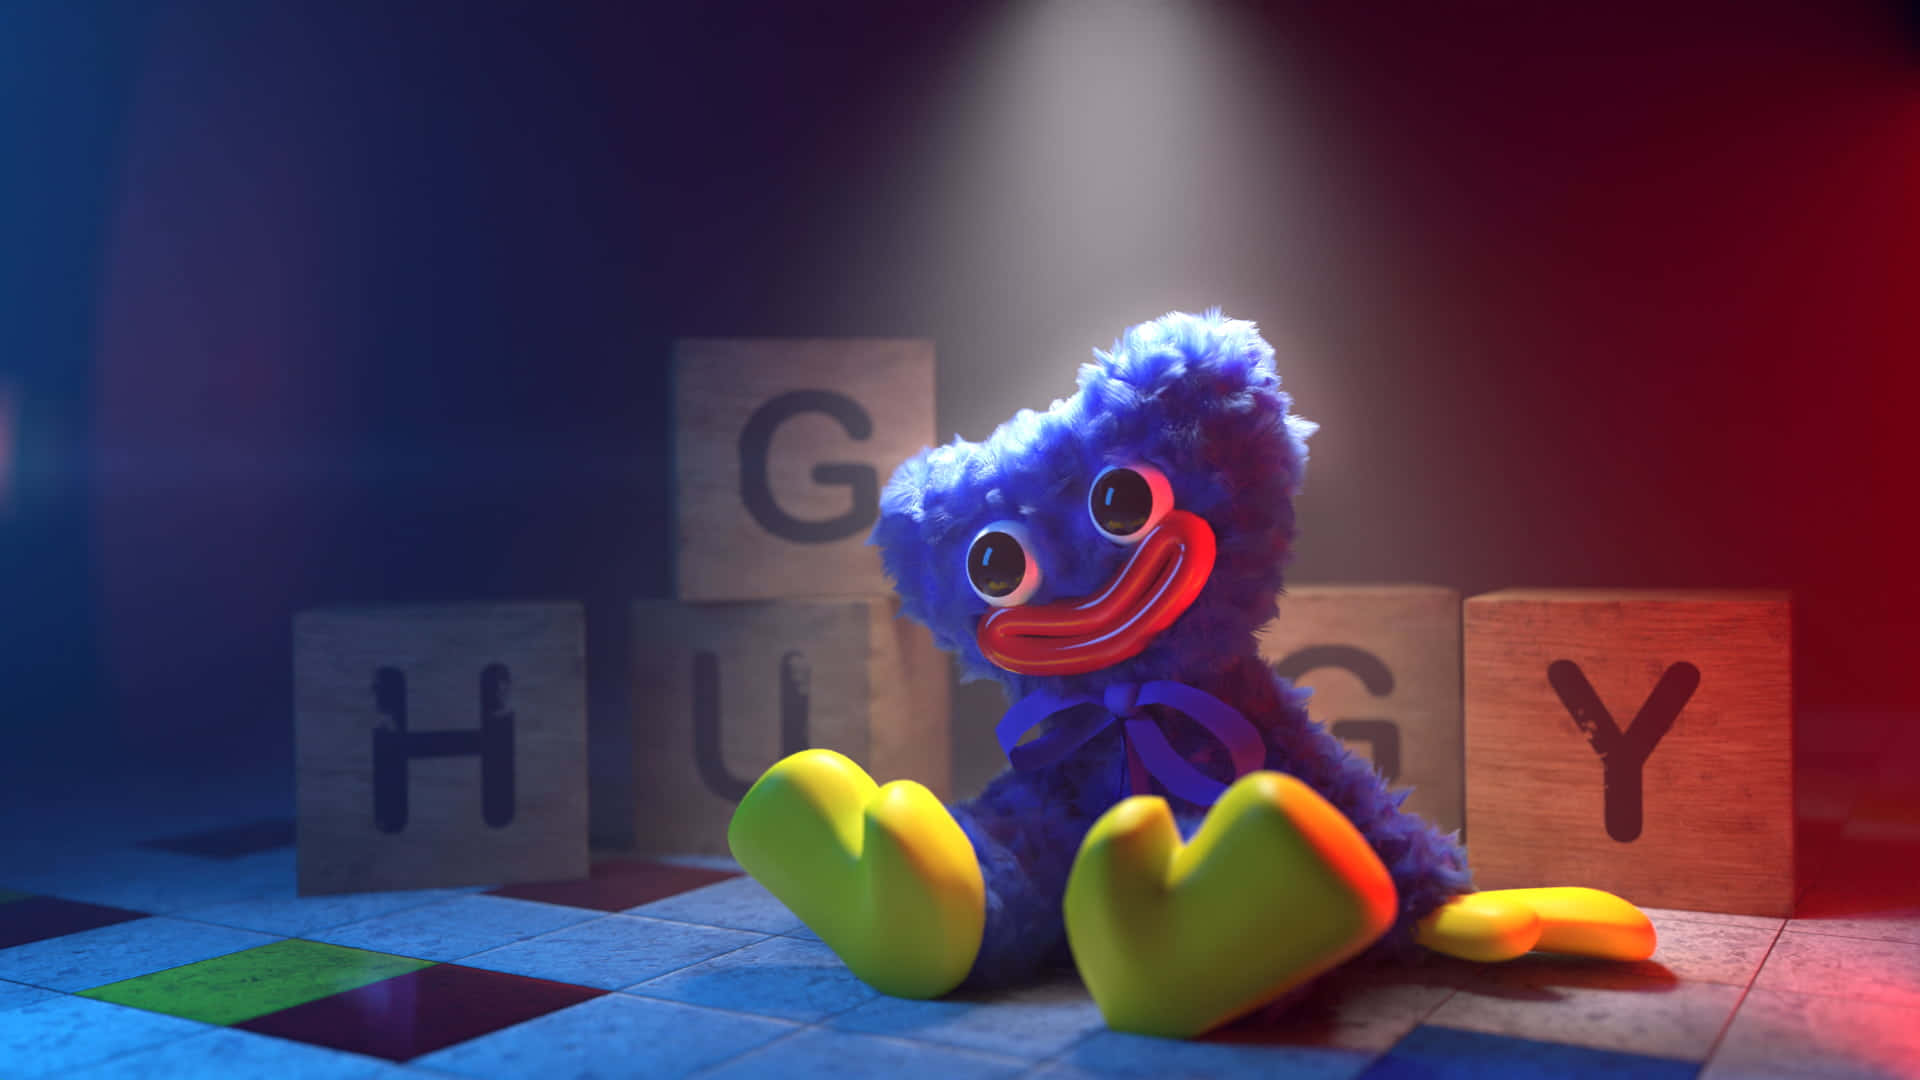 A playful toy character from the video game poppy playtime